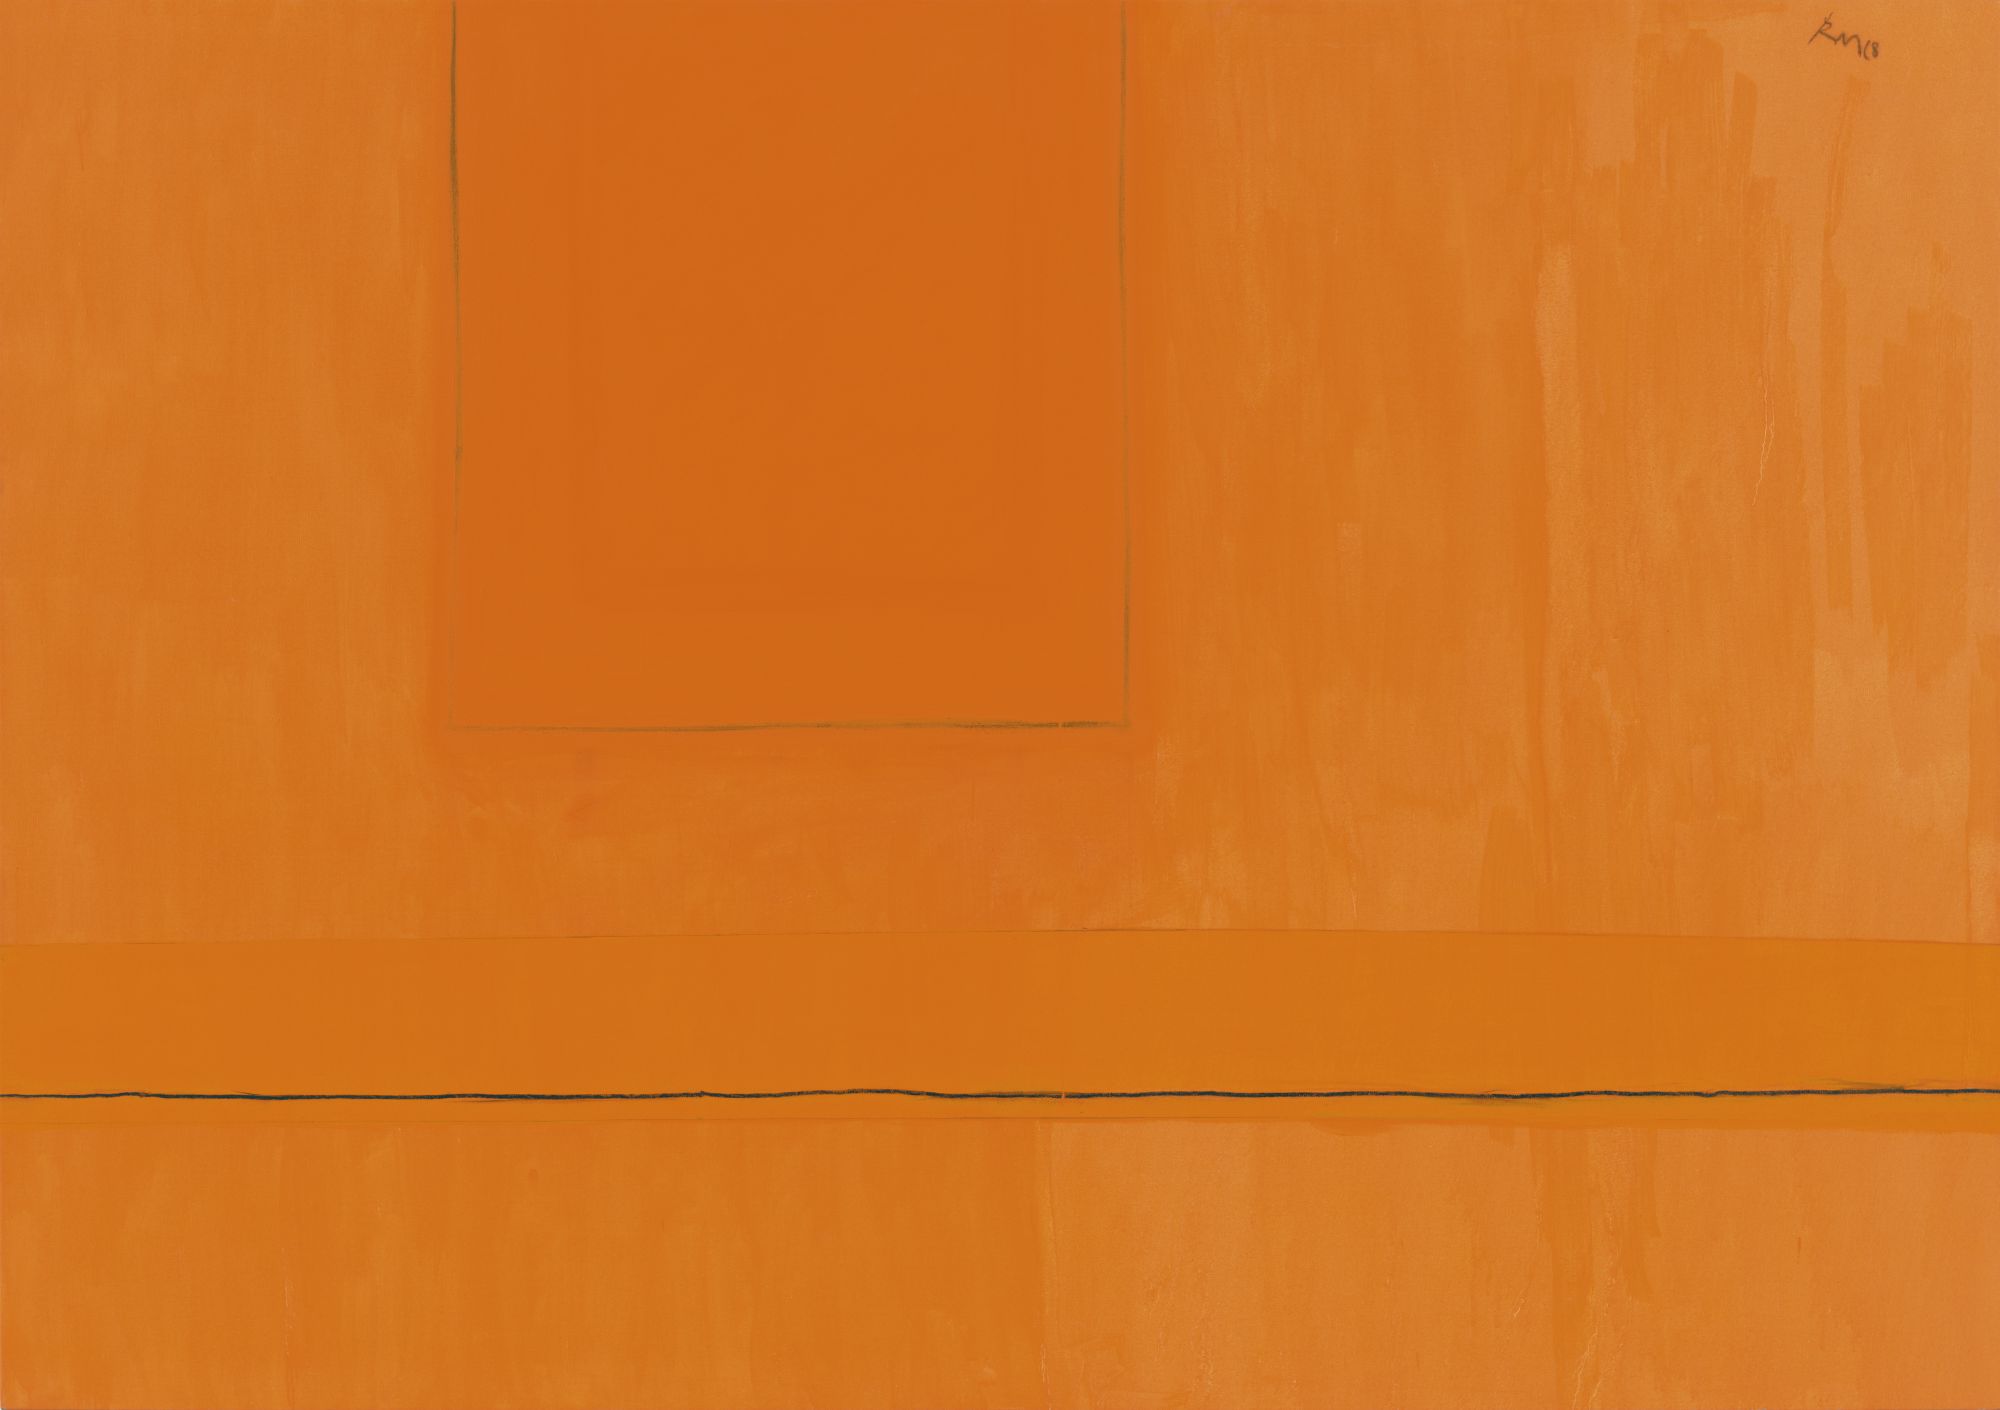 Open No. 24: In Variations of Orange, 1968, acrylic and charcoal on canvas, 81 ✕ 108 1/4 in. (205.7 ✕ 275 cm)